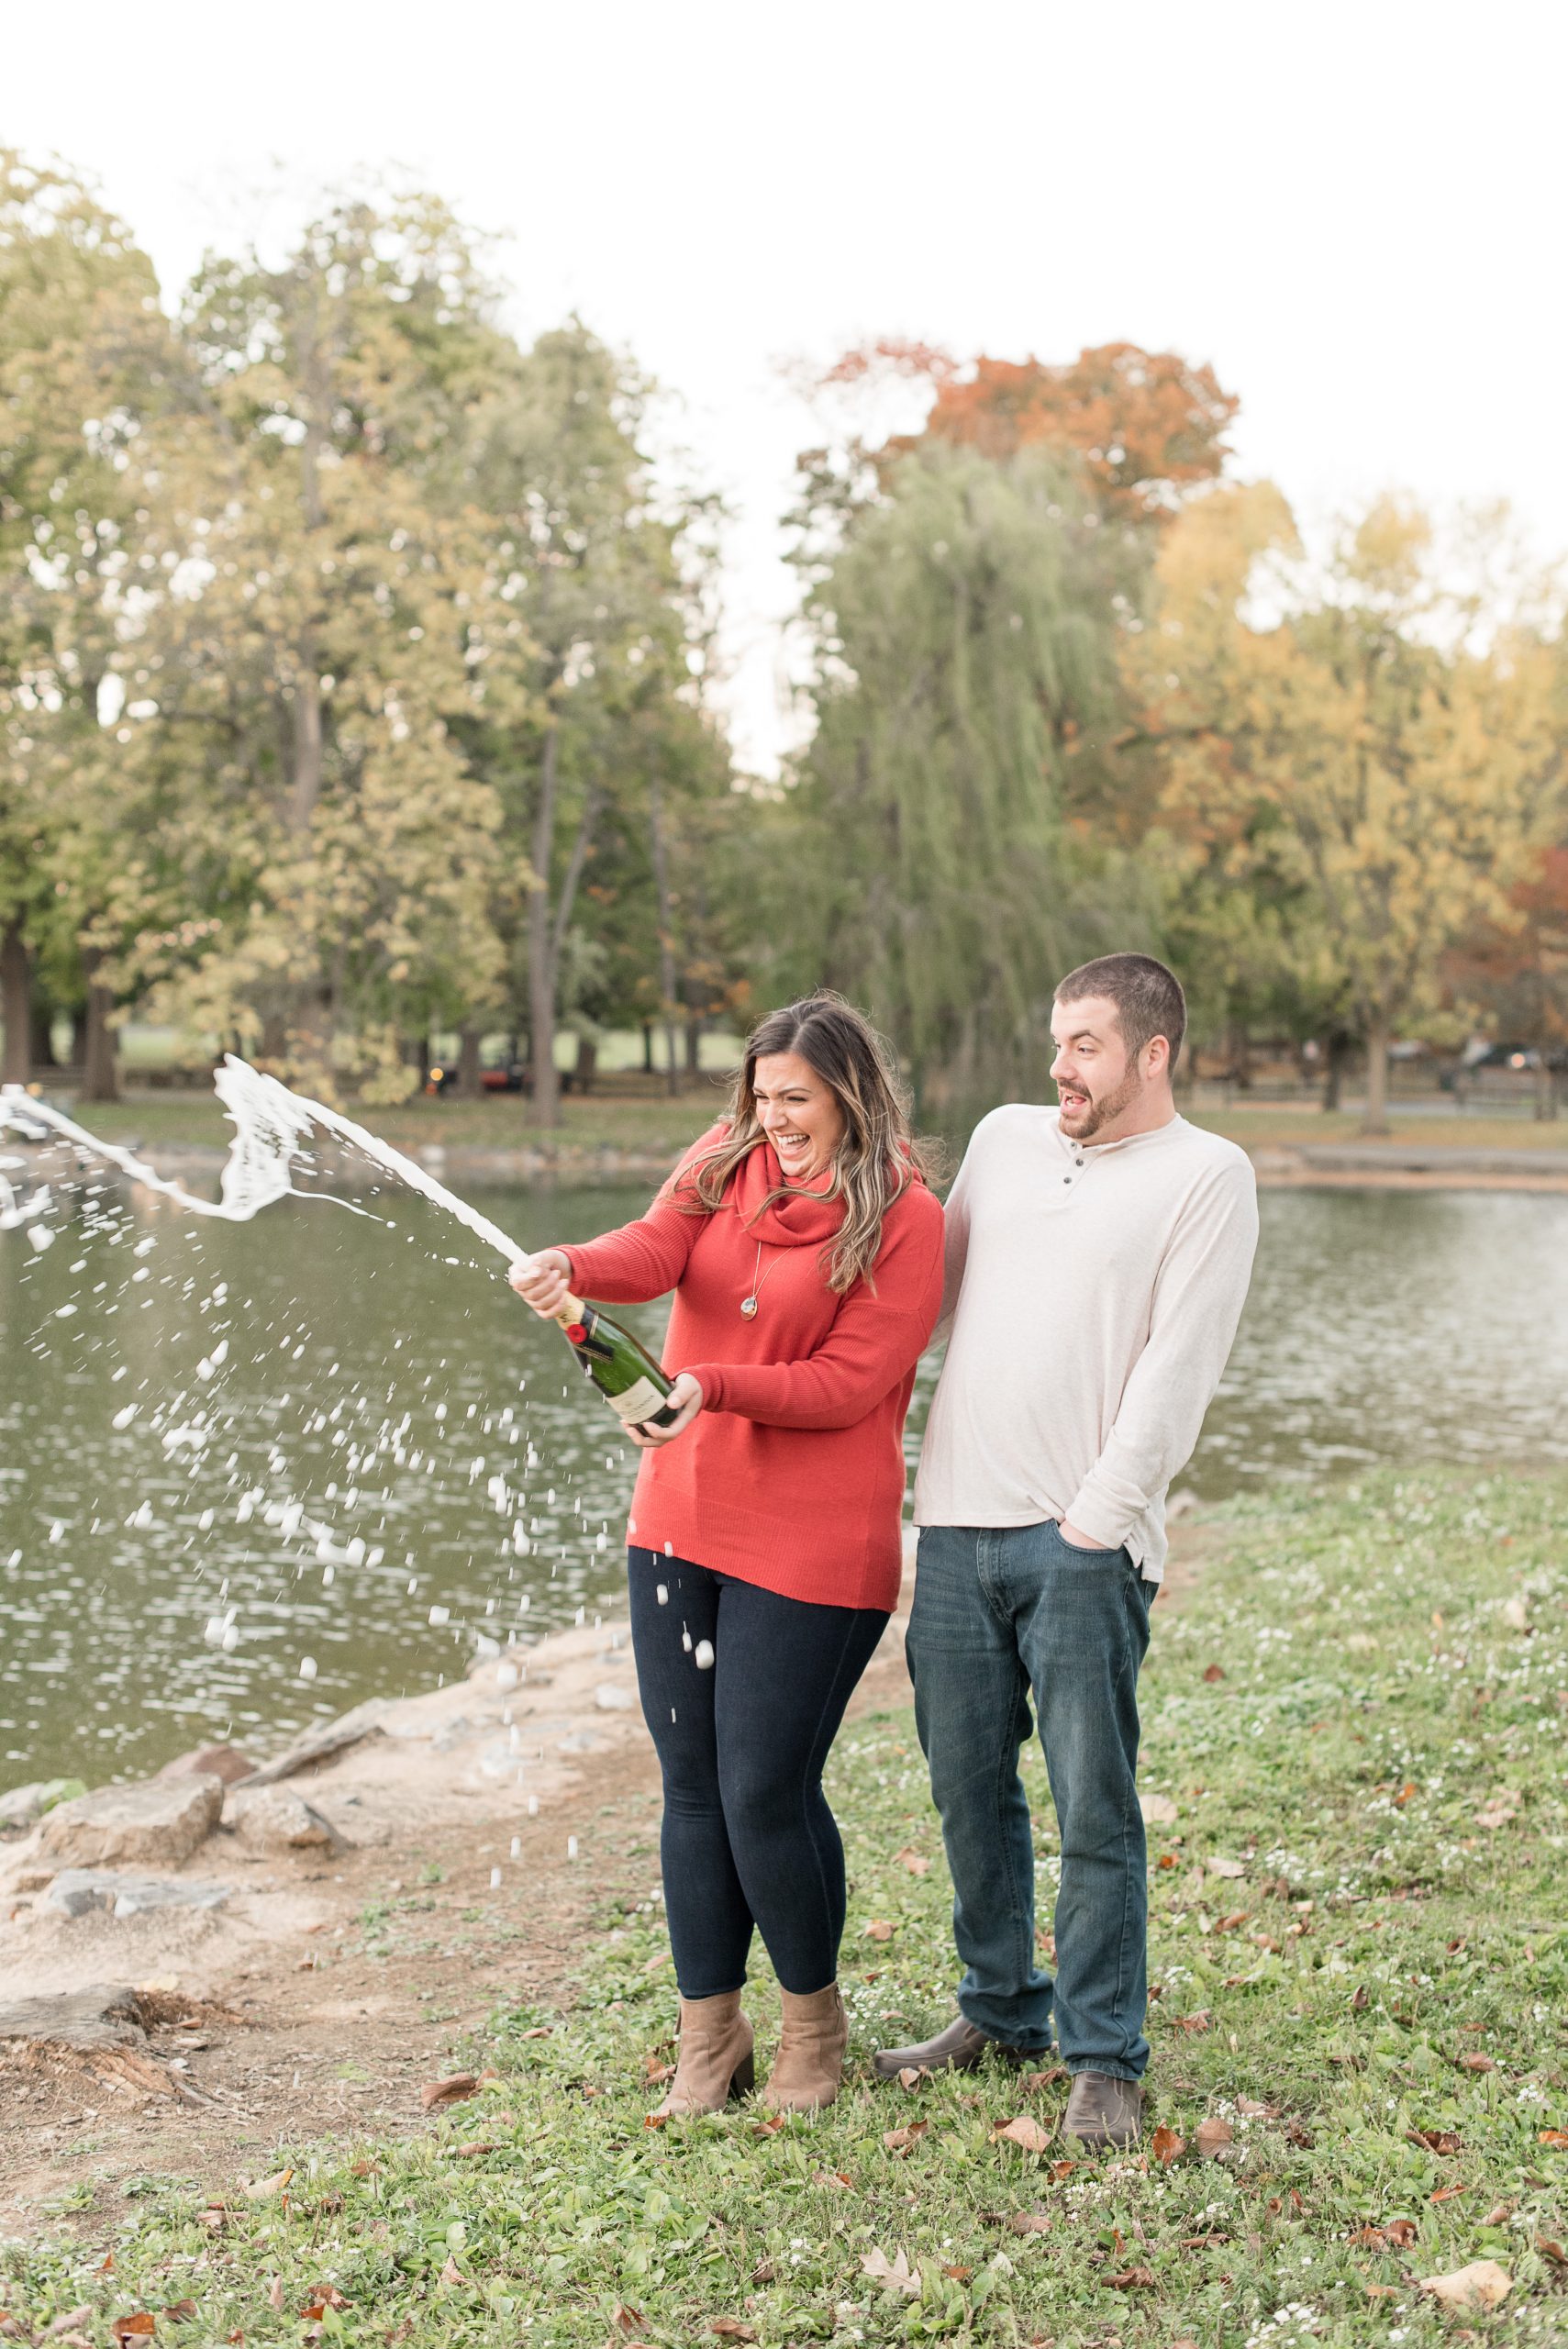 couple smiling while girl pops cork and wine bottle sprays at longs park